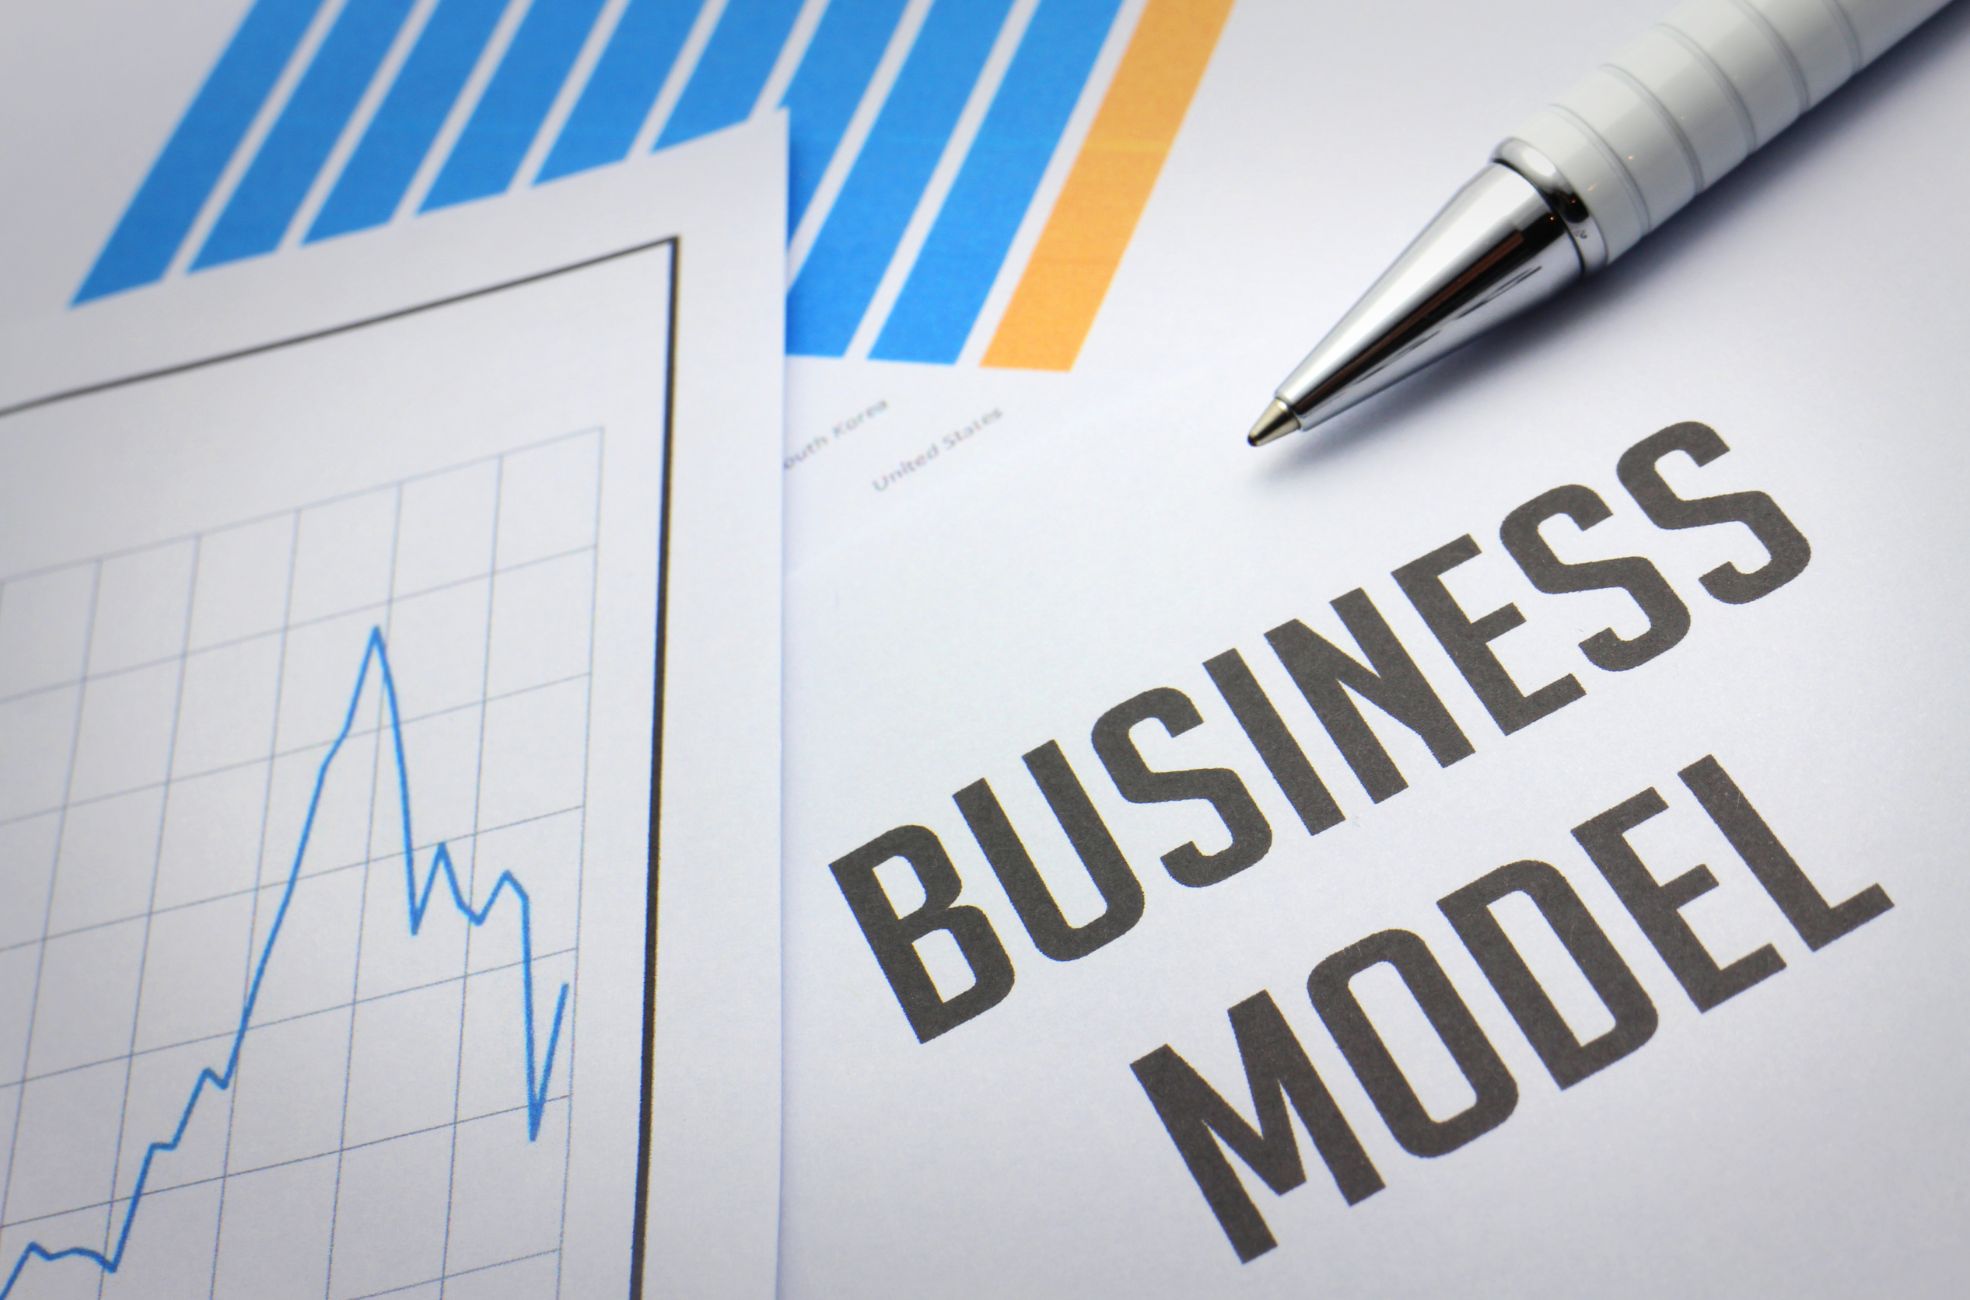 Spreadsheets With Title Of "Business Model"